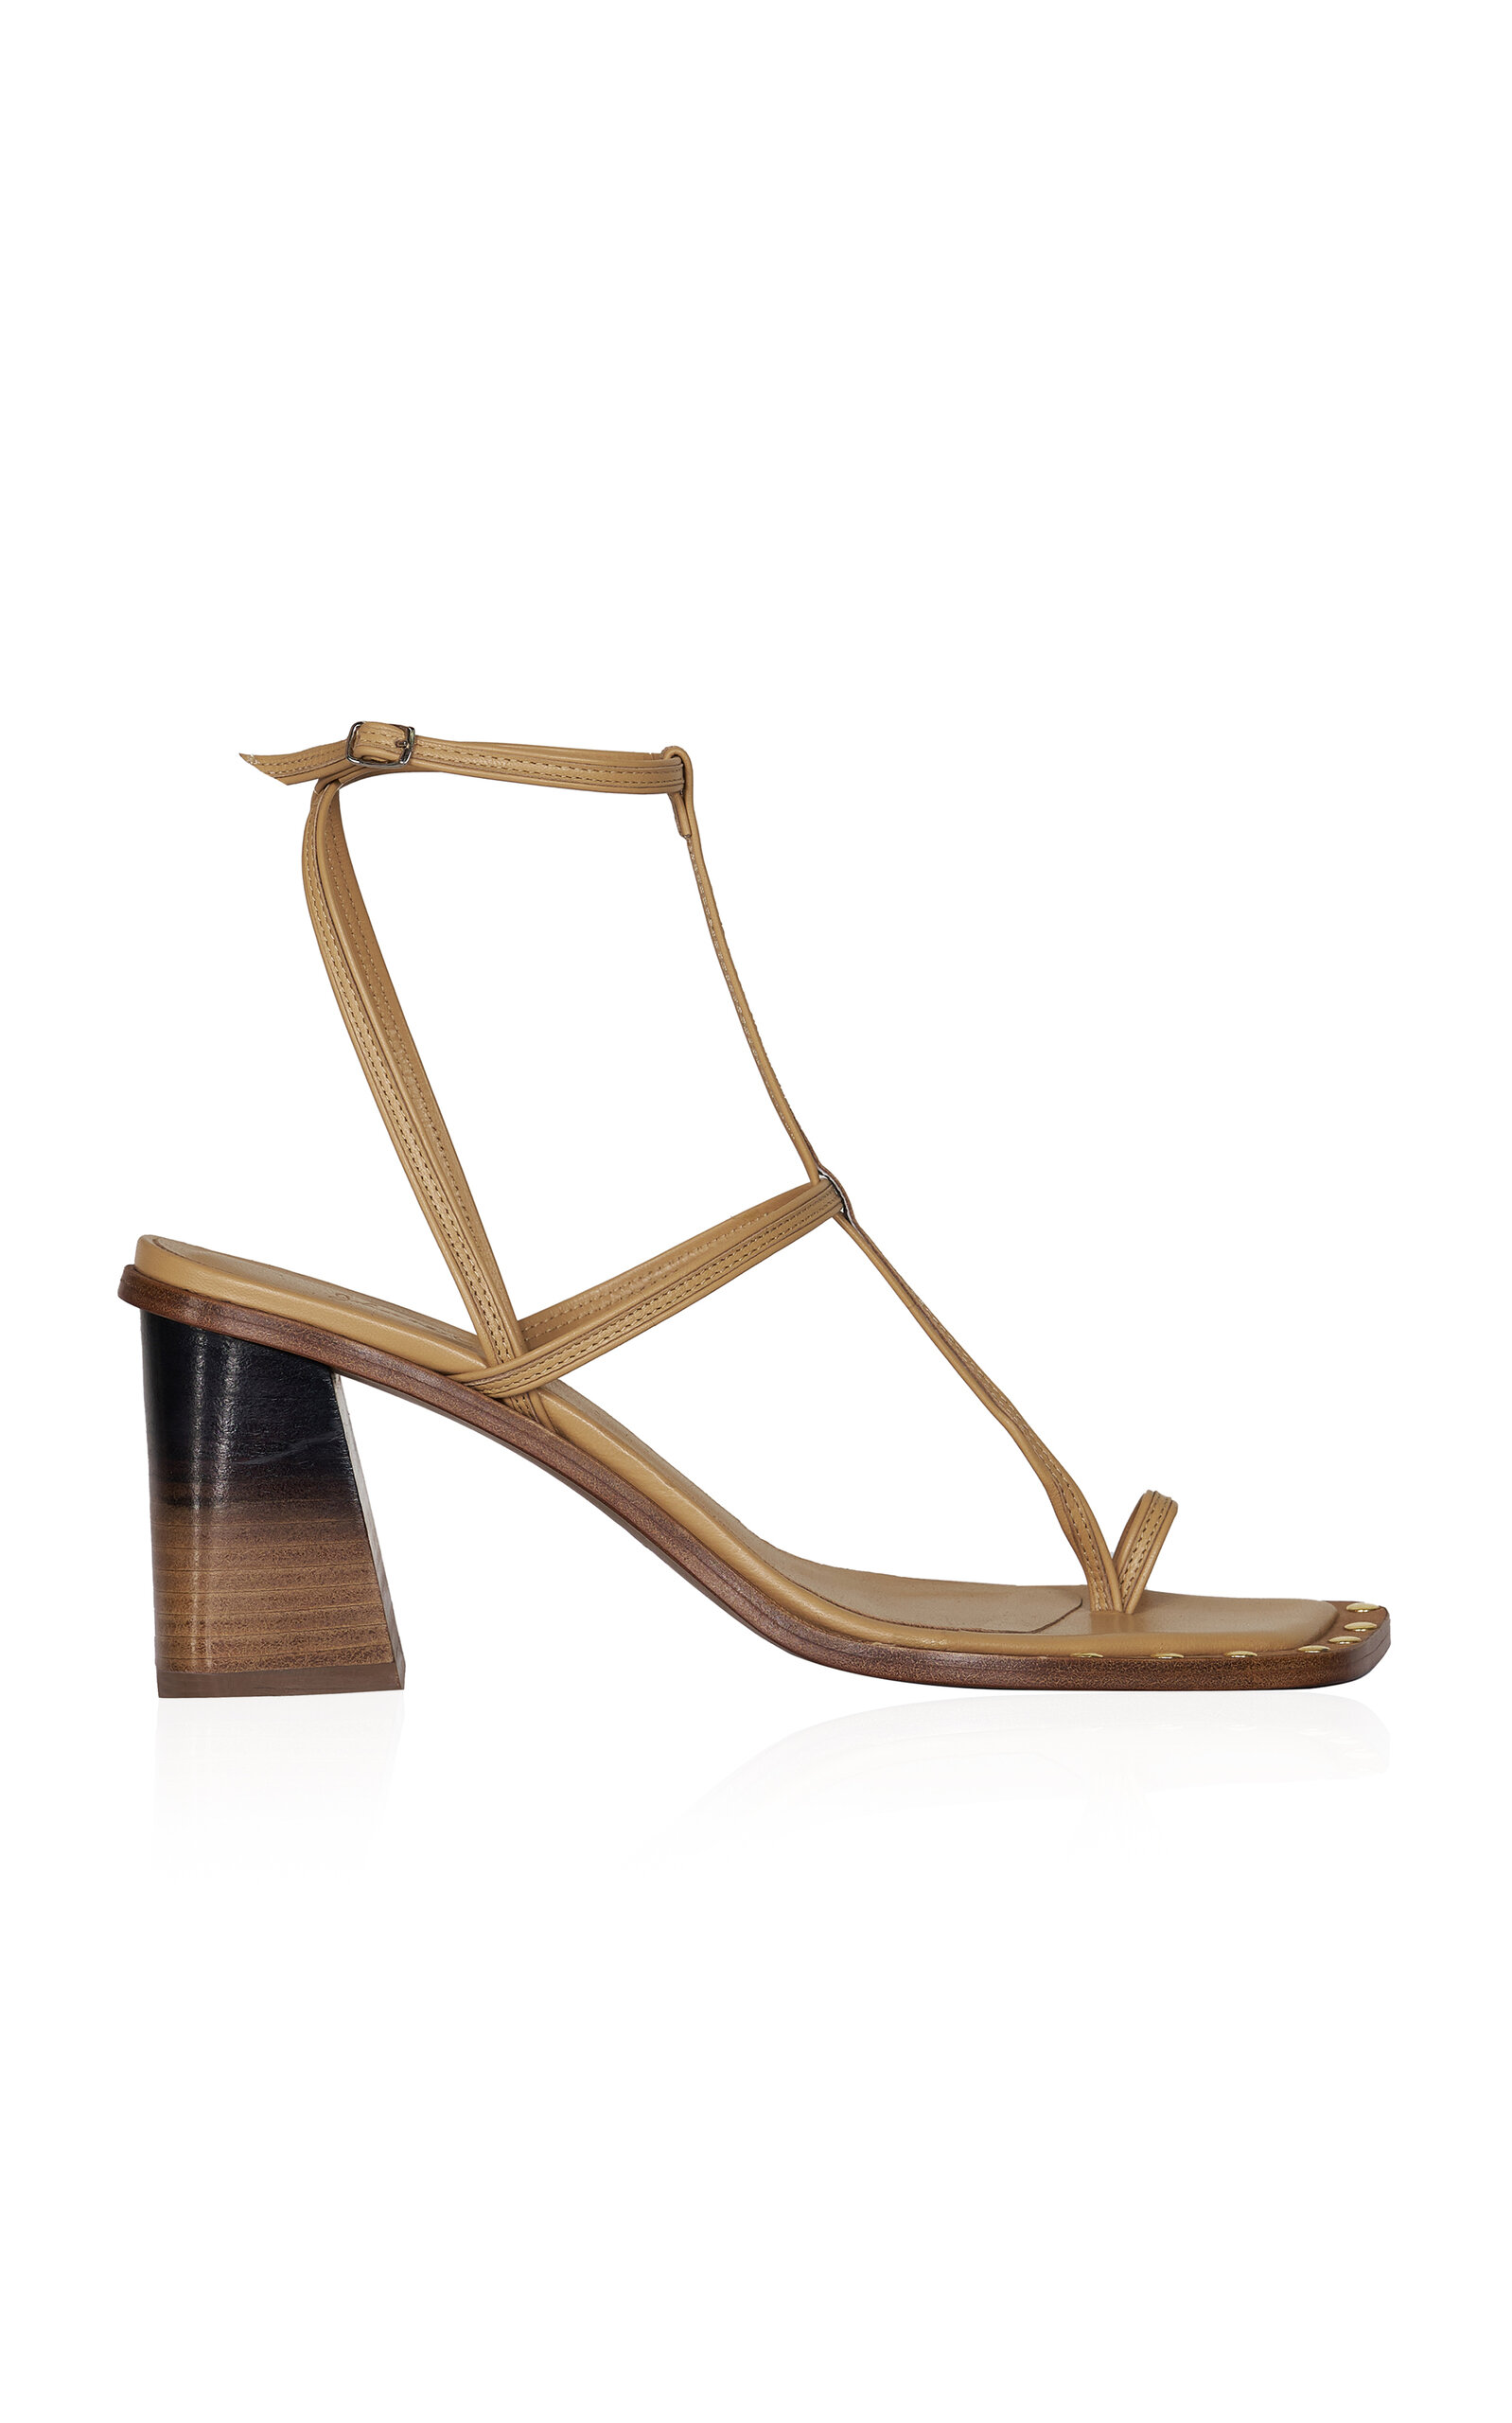 The Maze Leather Sandals